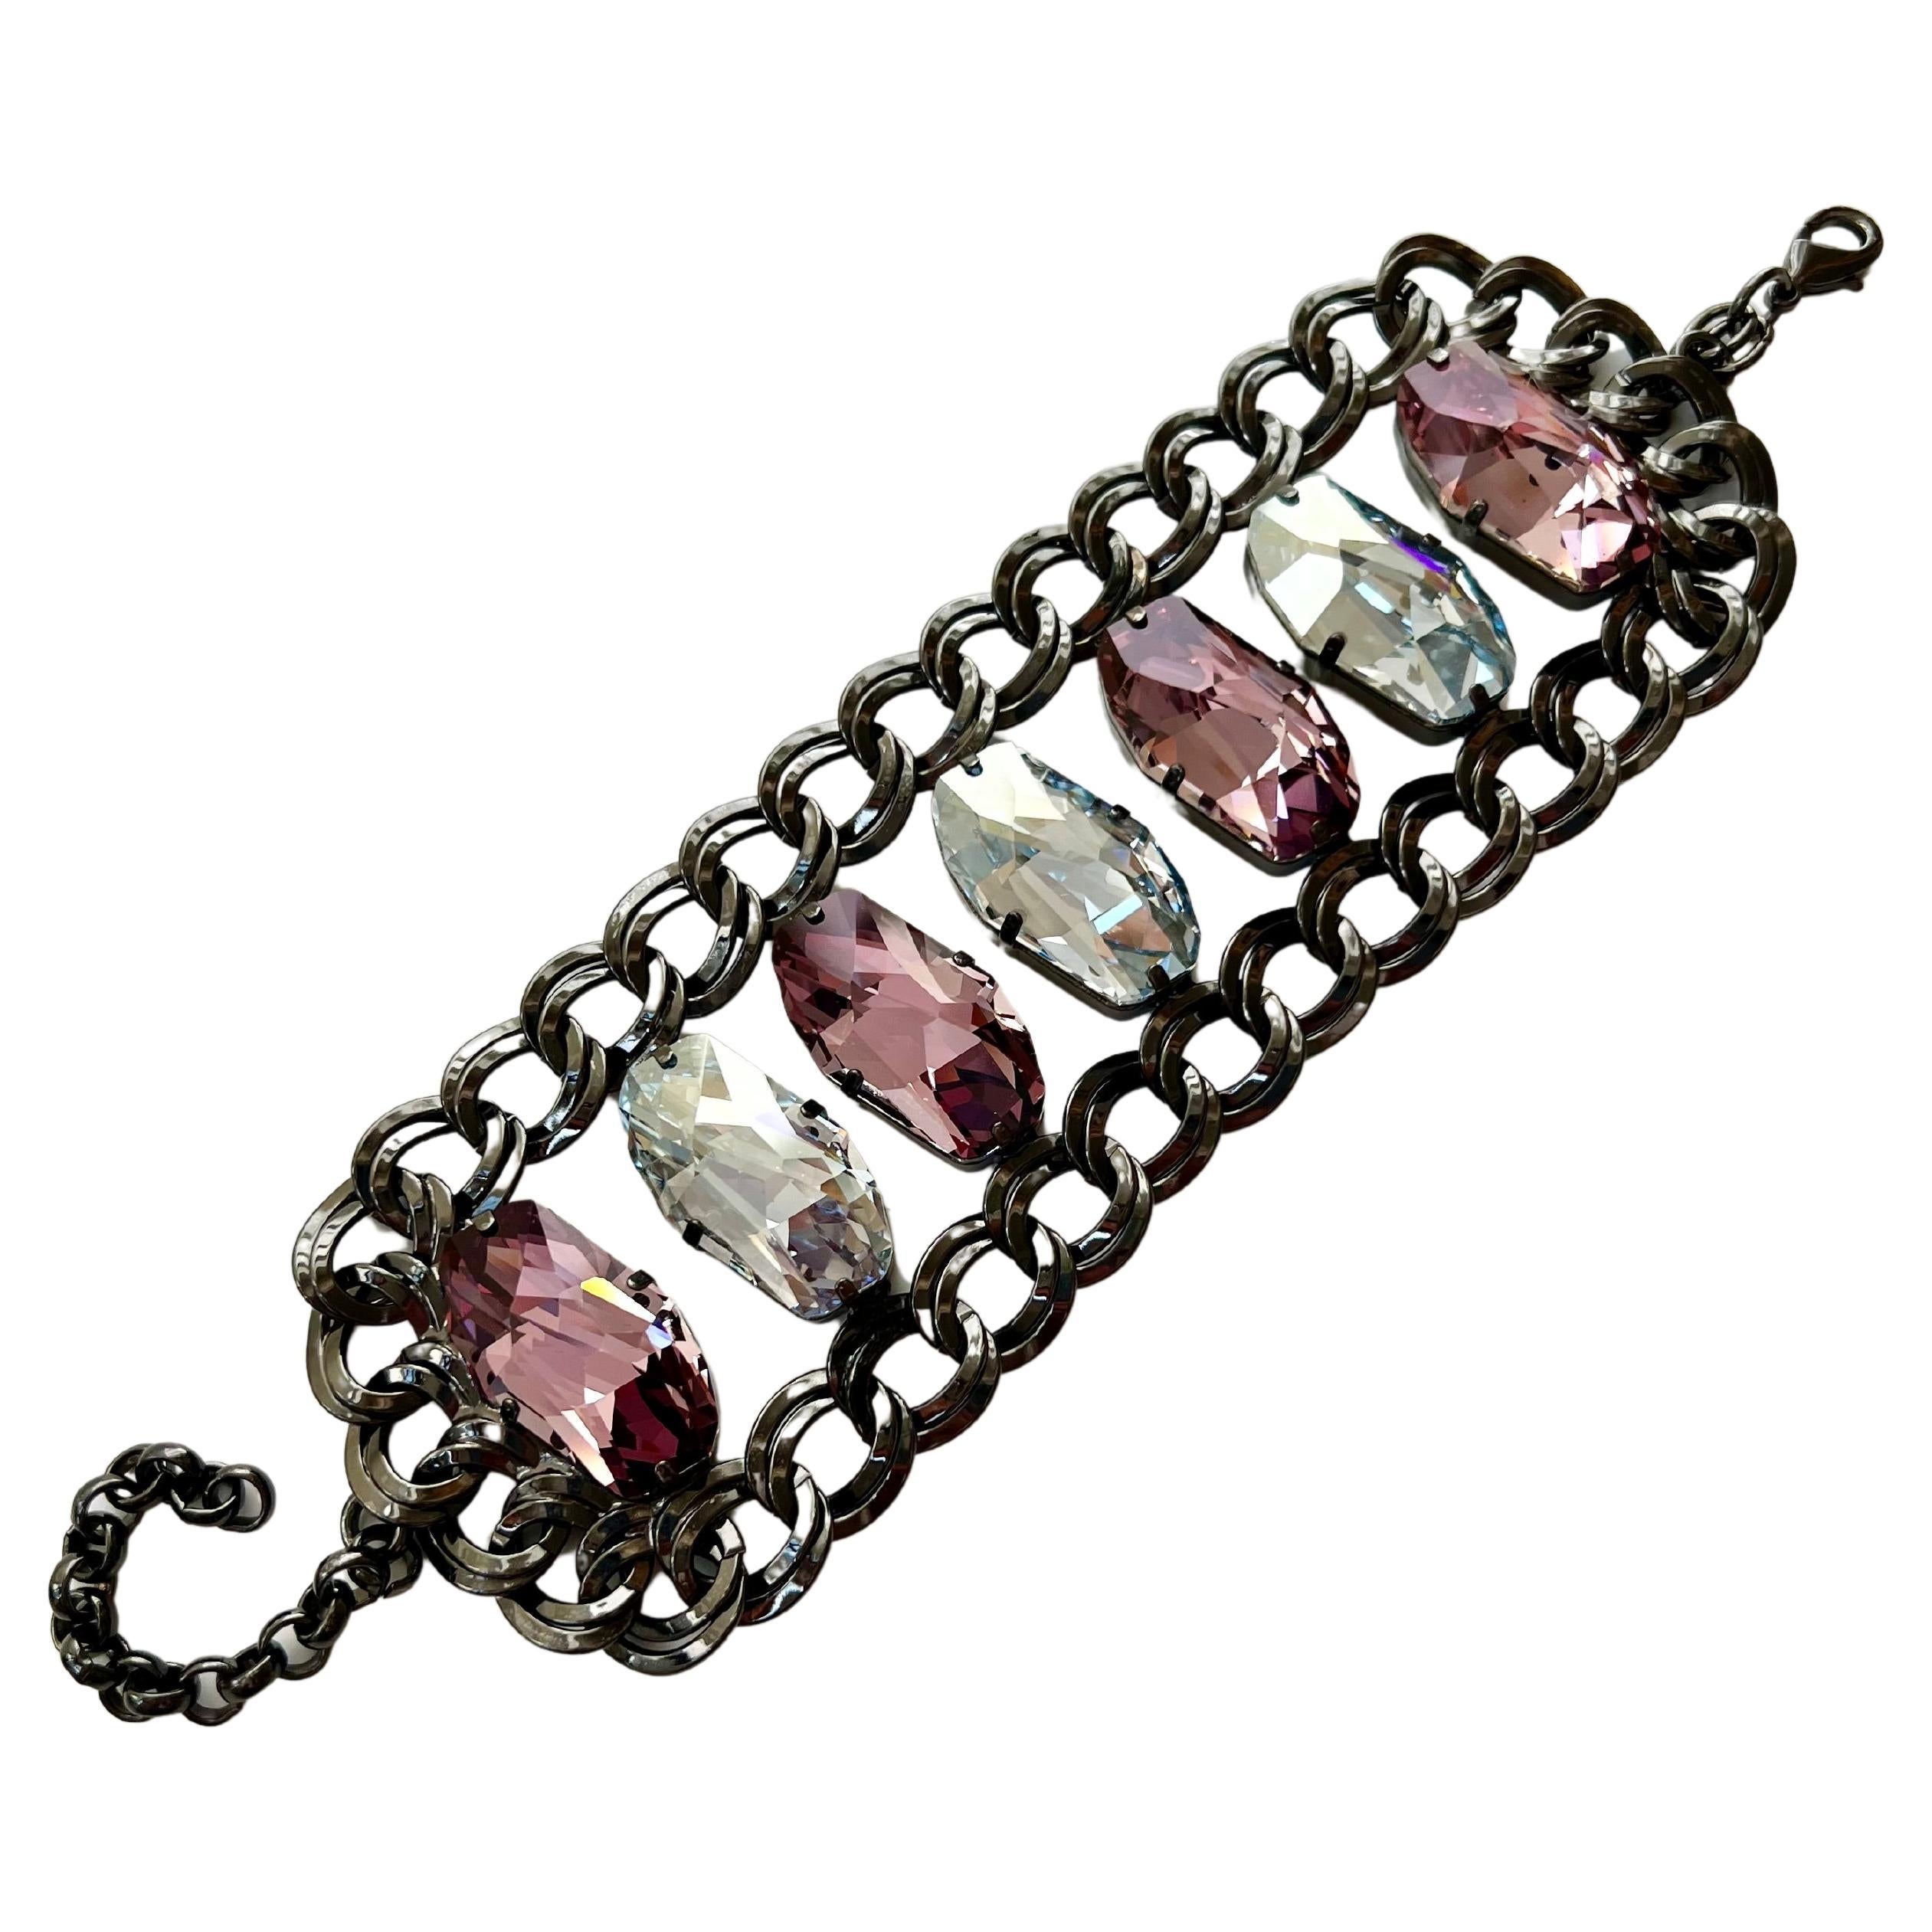 Pelush Pink And Clear Swarowsky Statement Bracelet With Chain Fashion Bracelet 